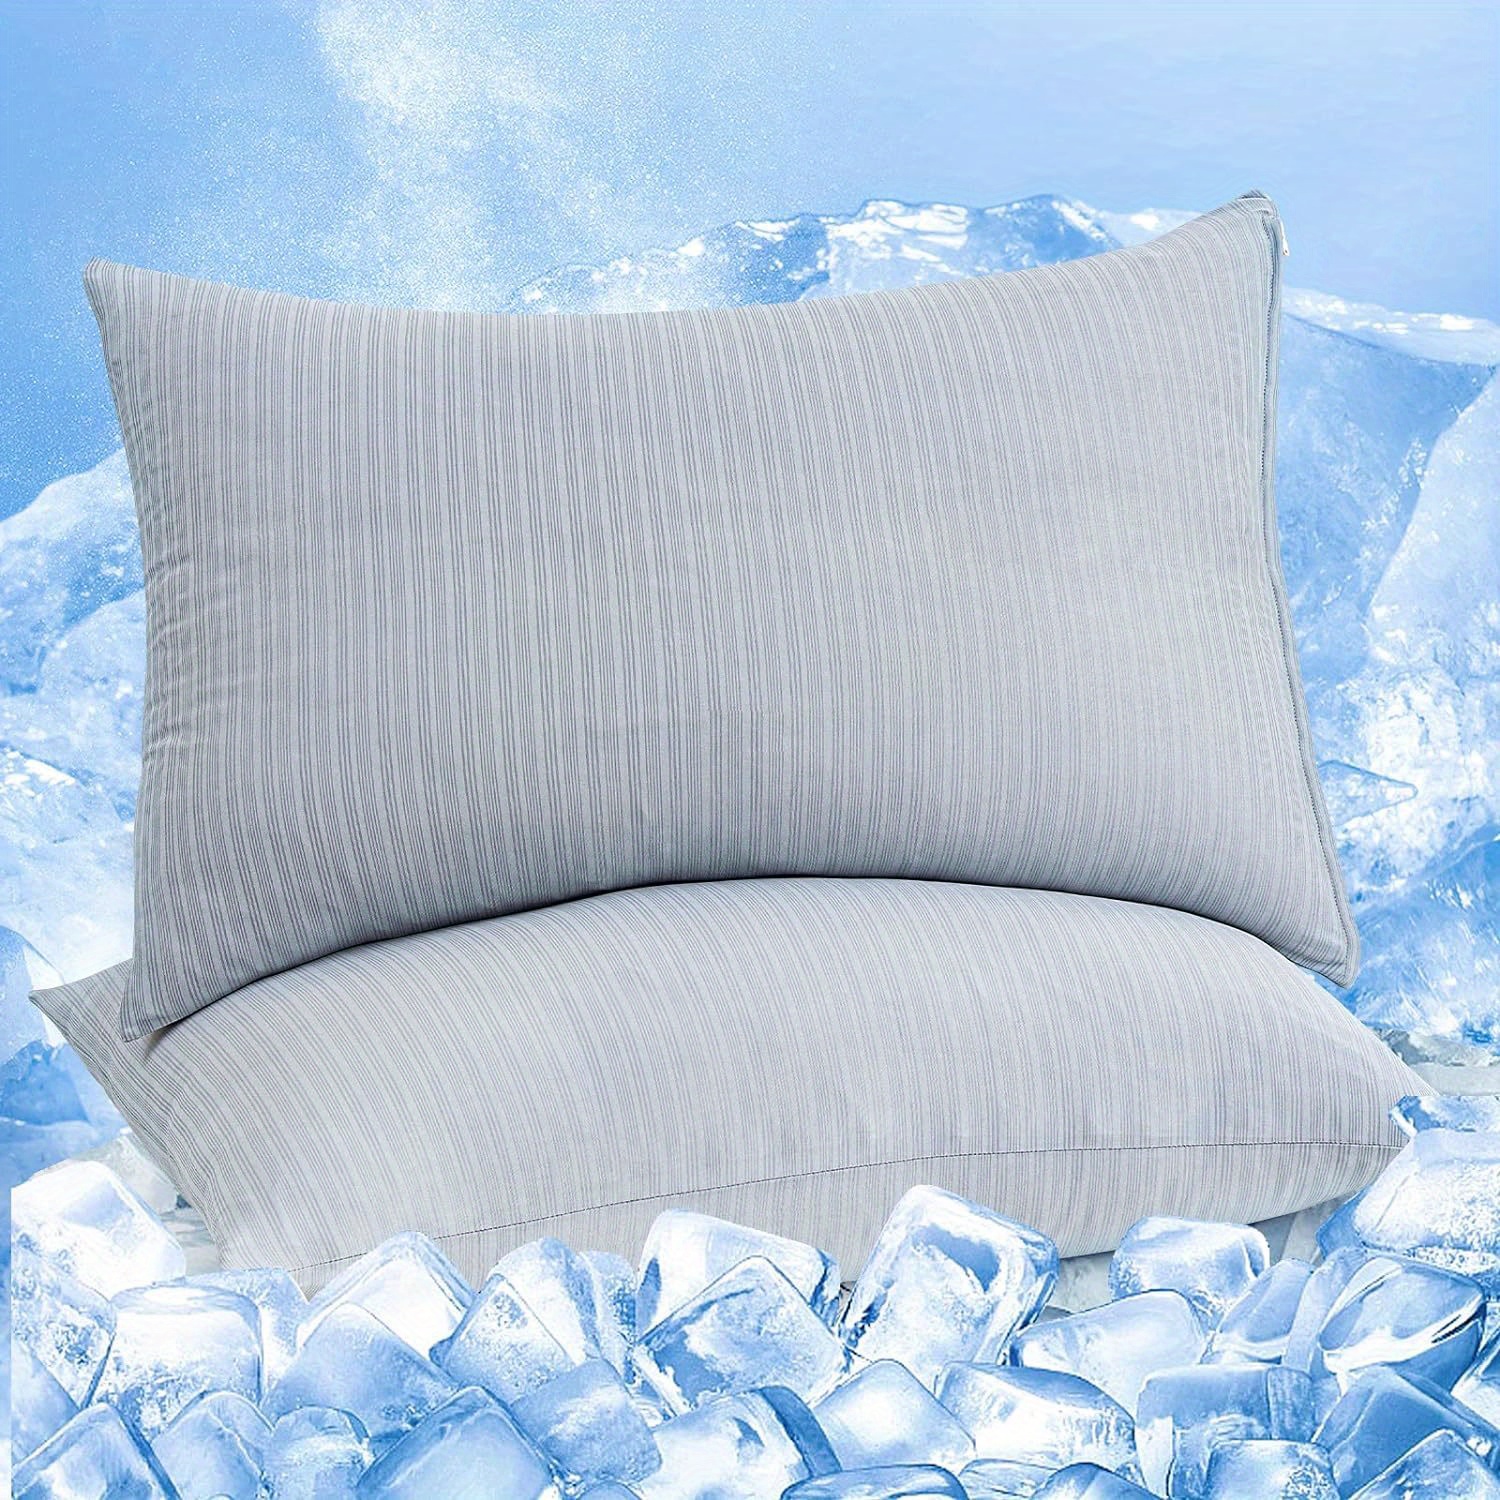 

Cooling Pillow Cases 2 Pack, 0.4 Cooling Pillowcases For Hot Sleepers, Cool Summer Pillow Cover With Double-side Design & Hidden Zipper (20"x26")